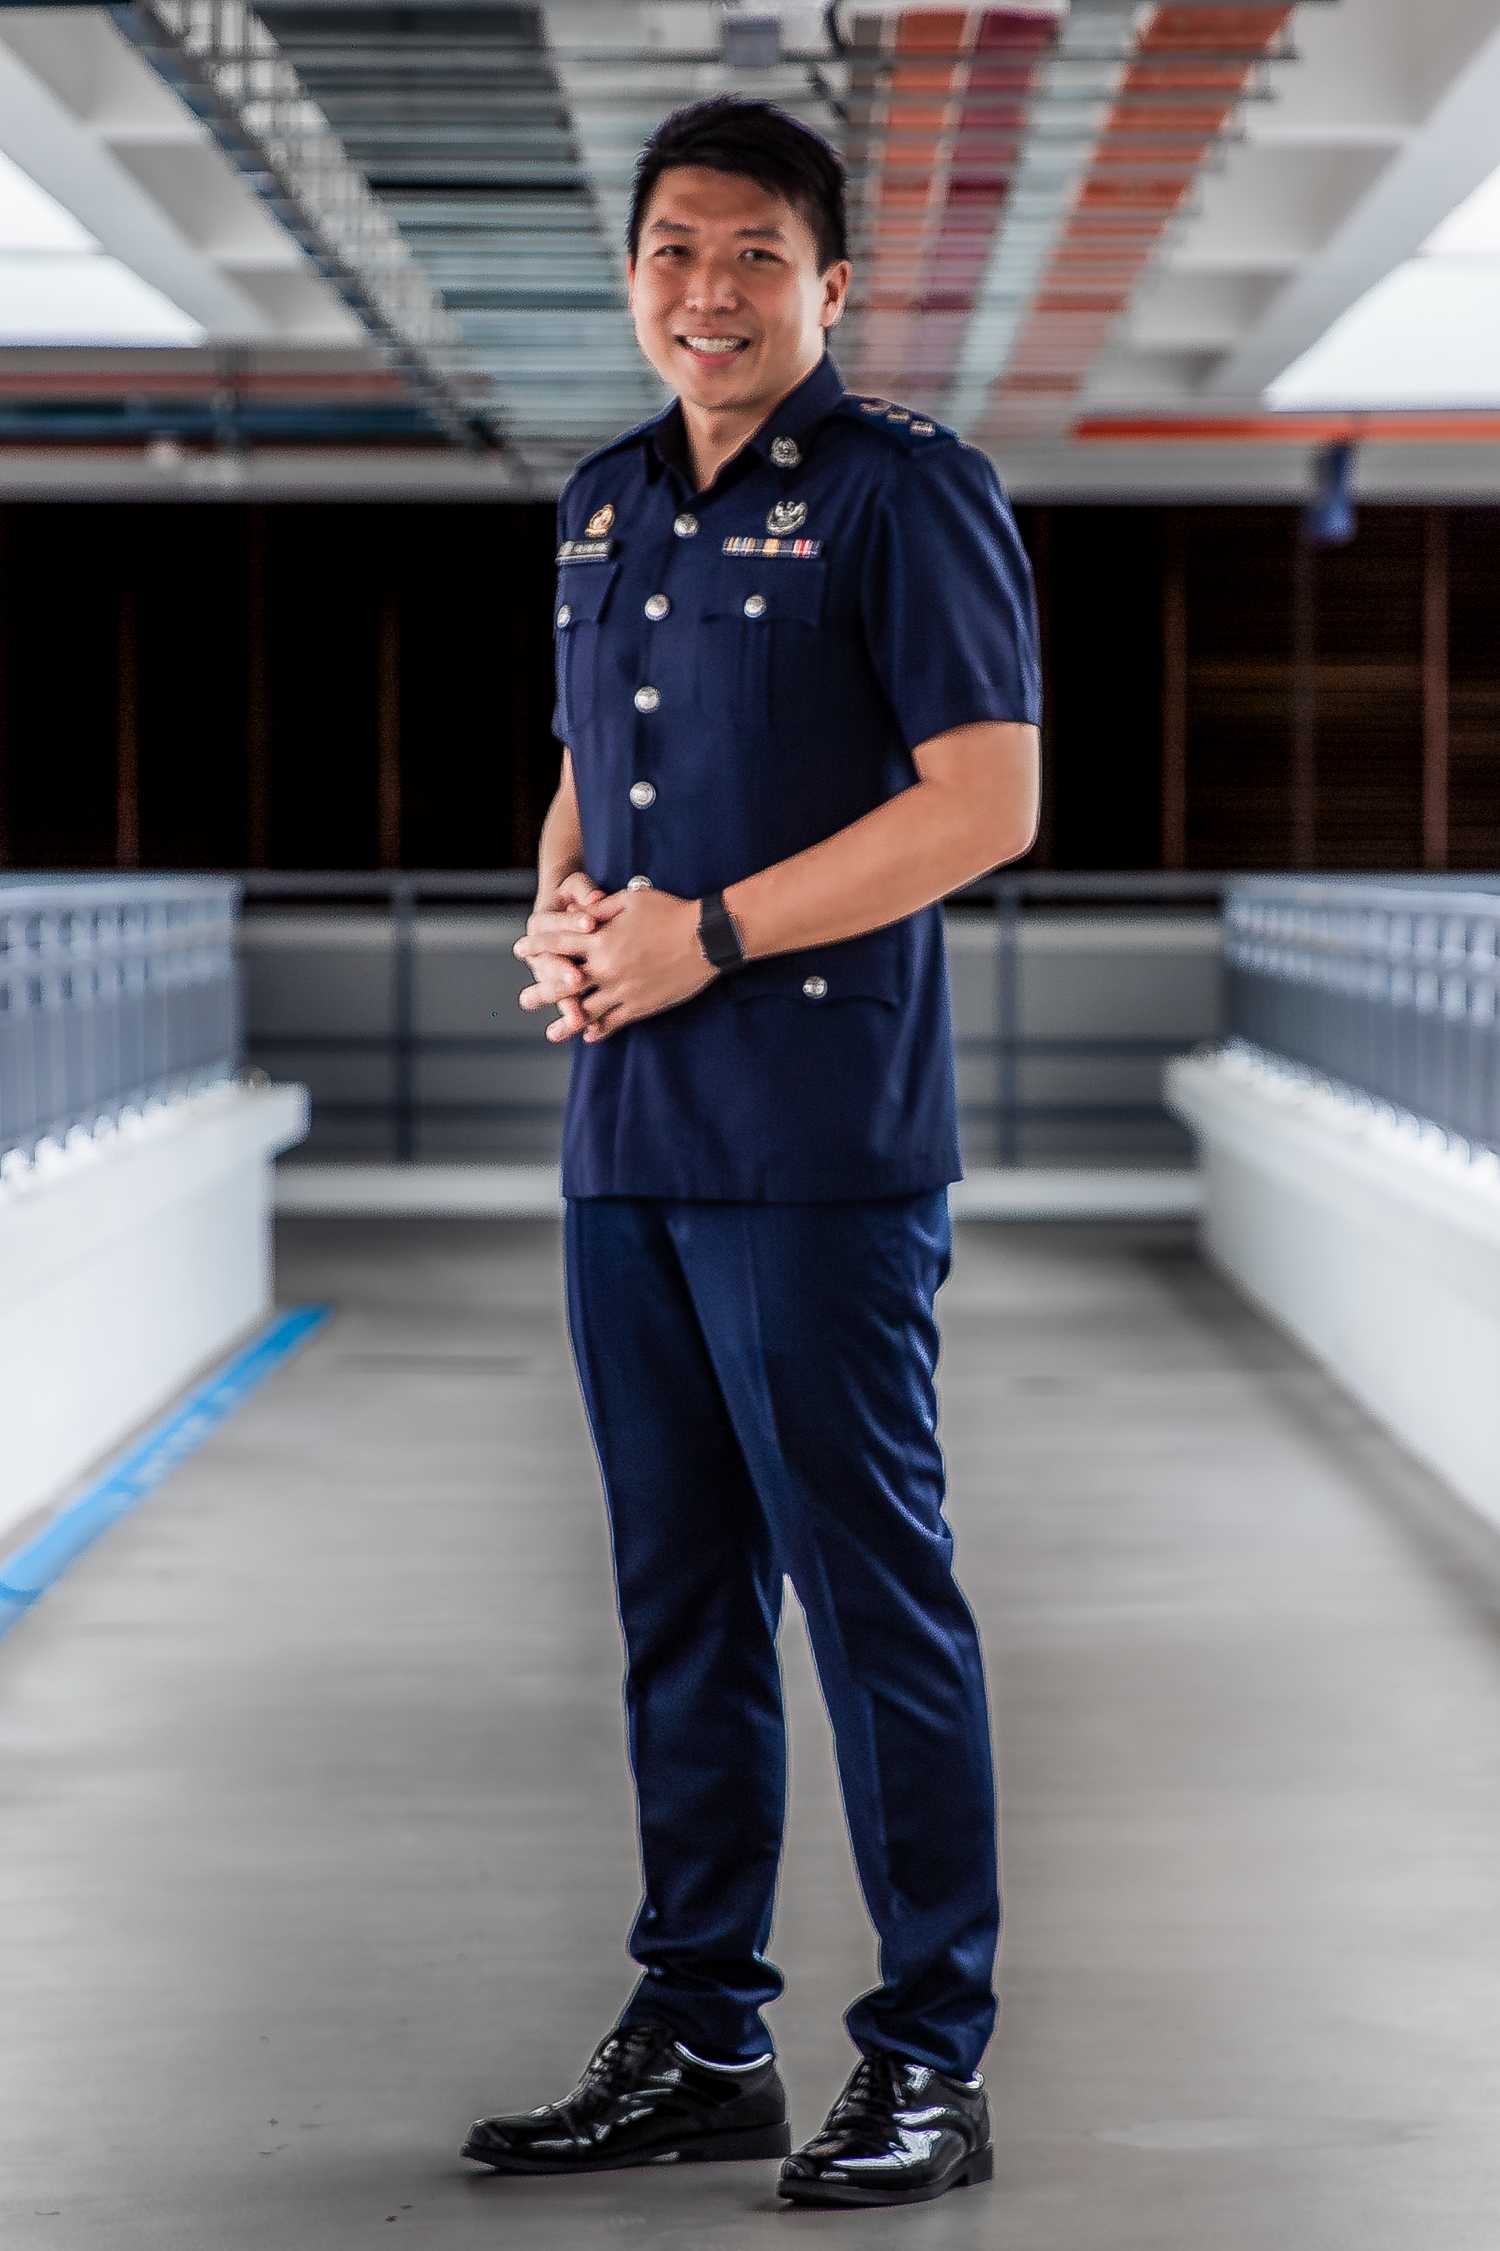 A profile shot of Superintendent of Police Koh Chao Rong in uniform, smiling and standing in front of the camera.